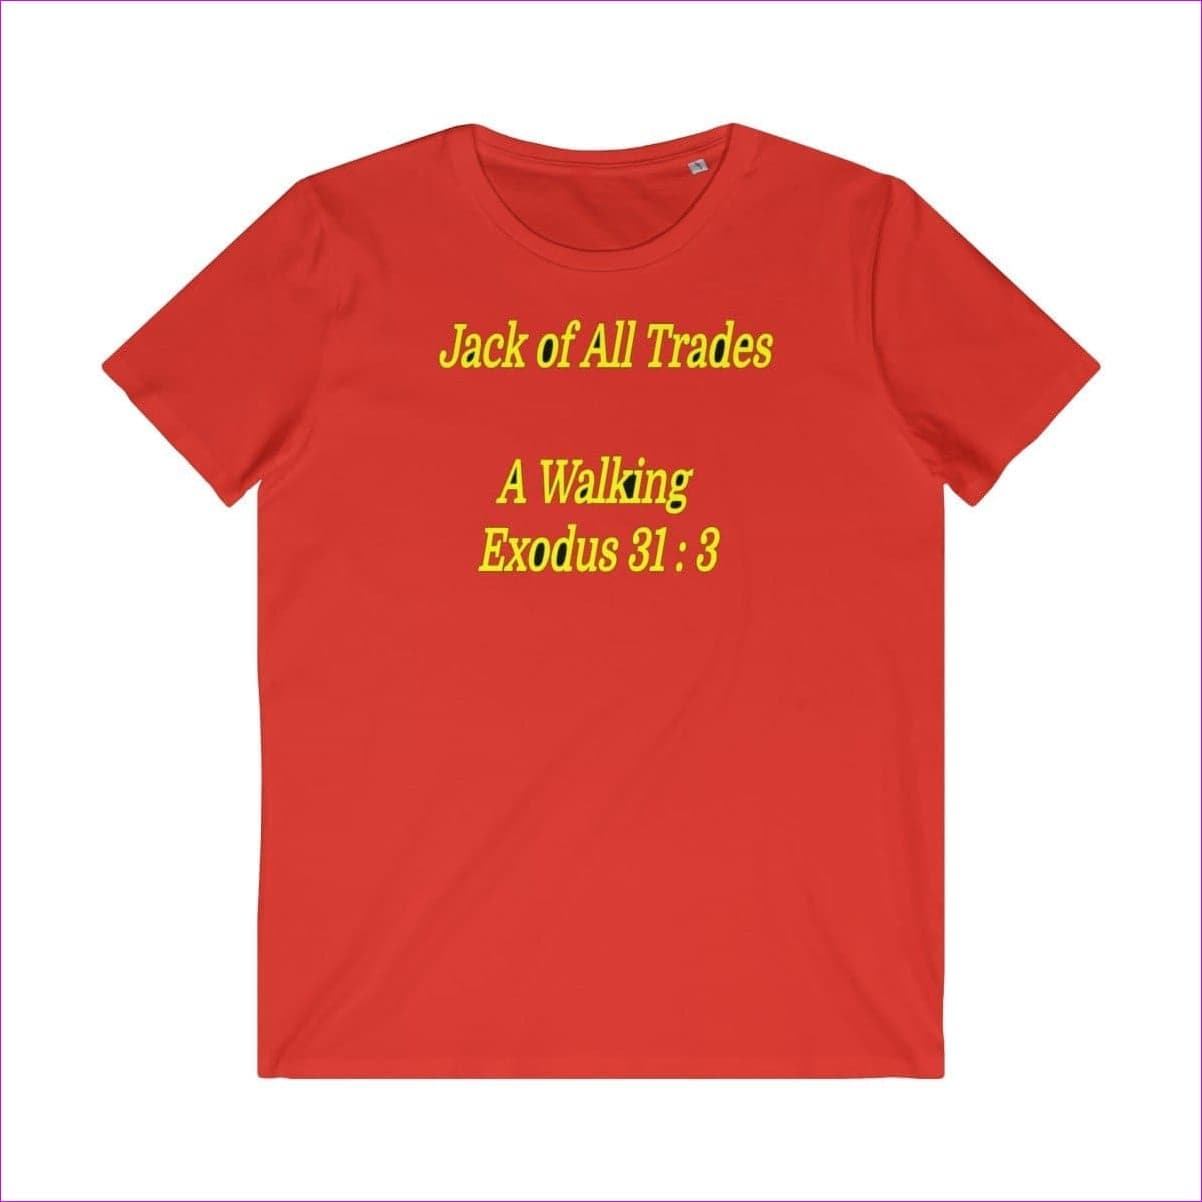 Red Jack of All Trades Men's Organic Tee - Men's T-Shirt at TFC&H Co.